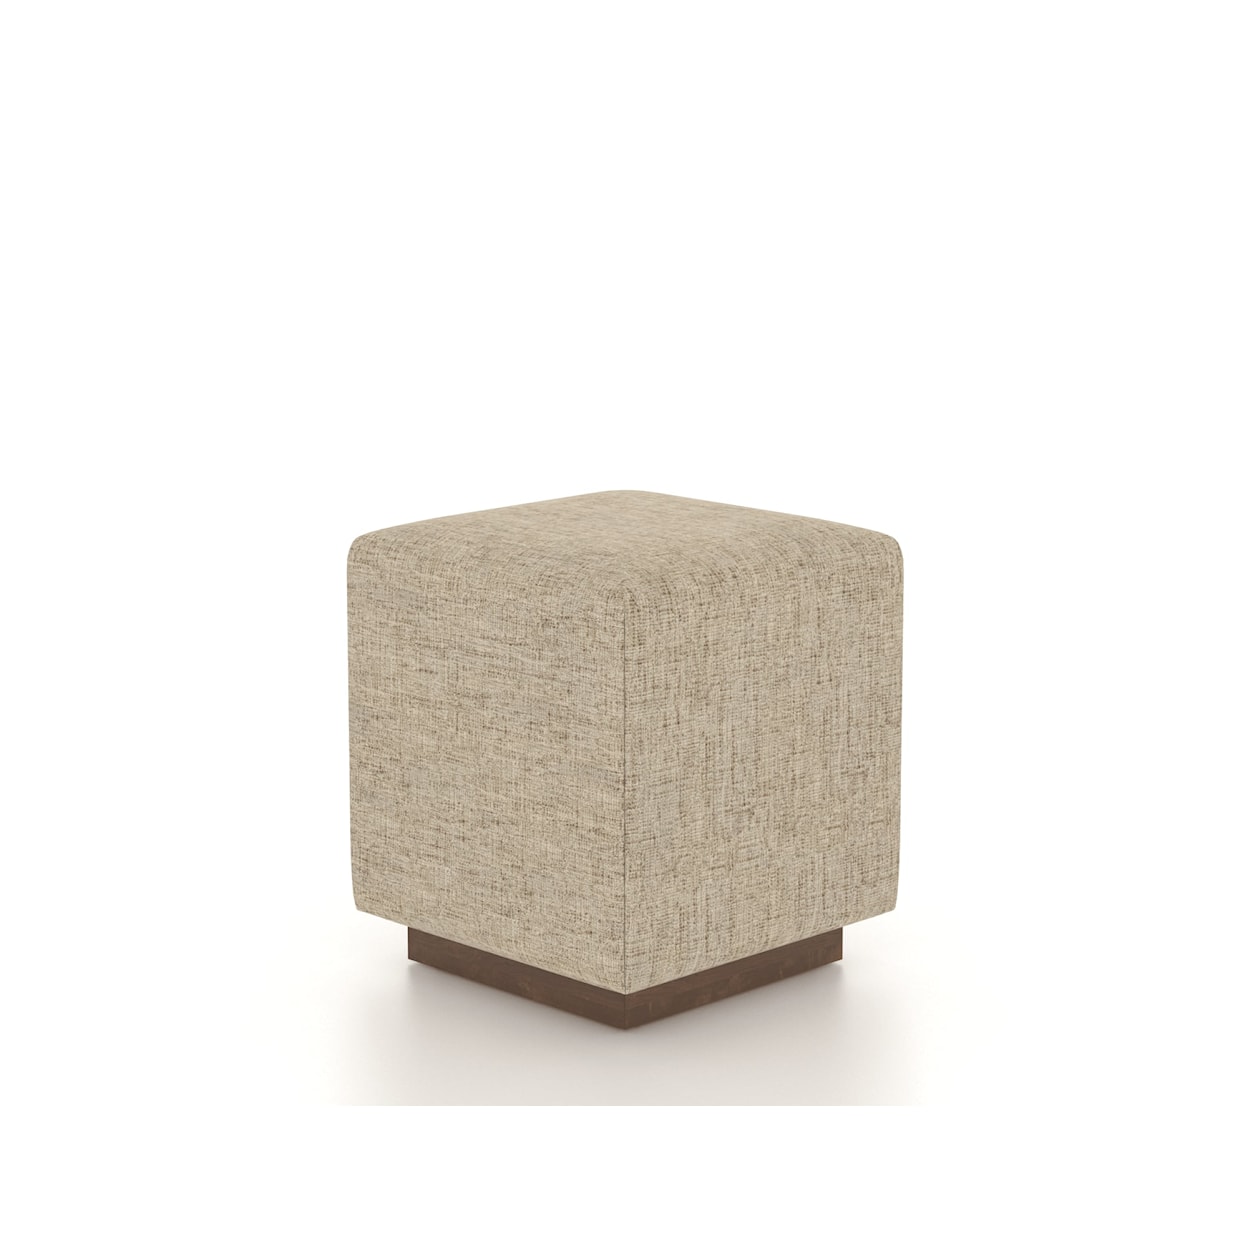 Canadel Canadel Upholstered Cube Bench